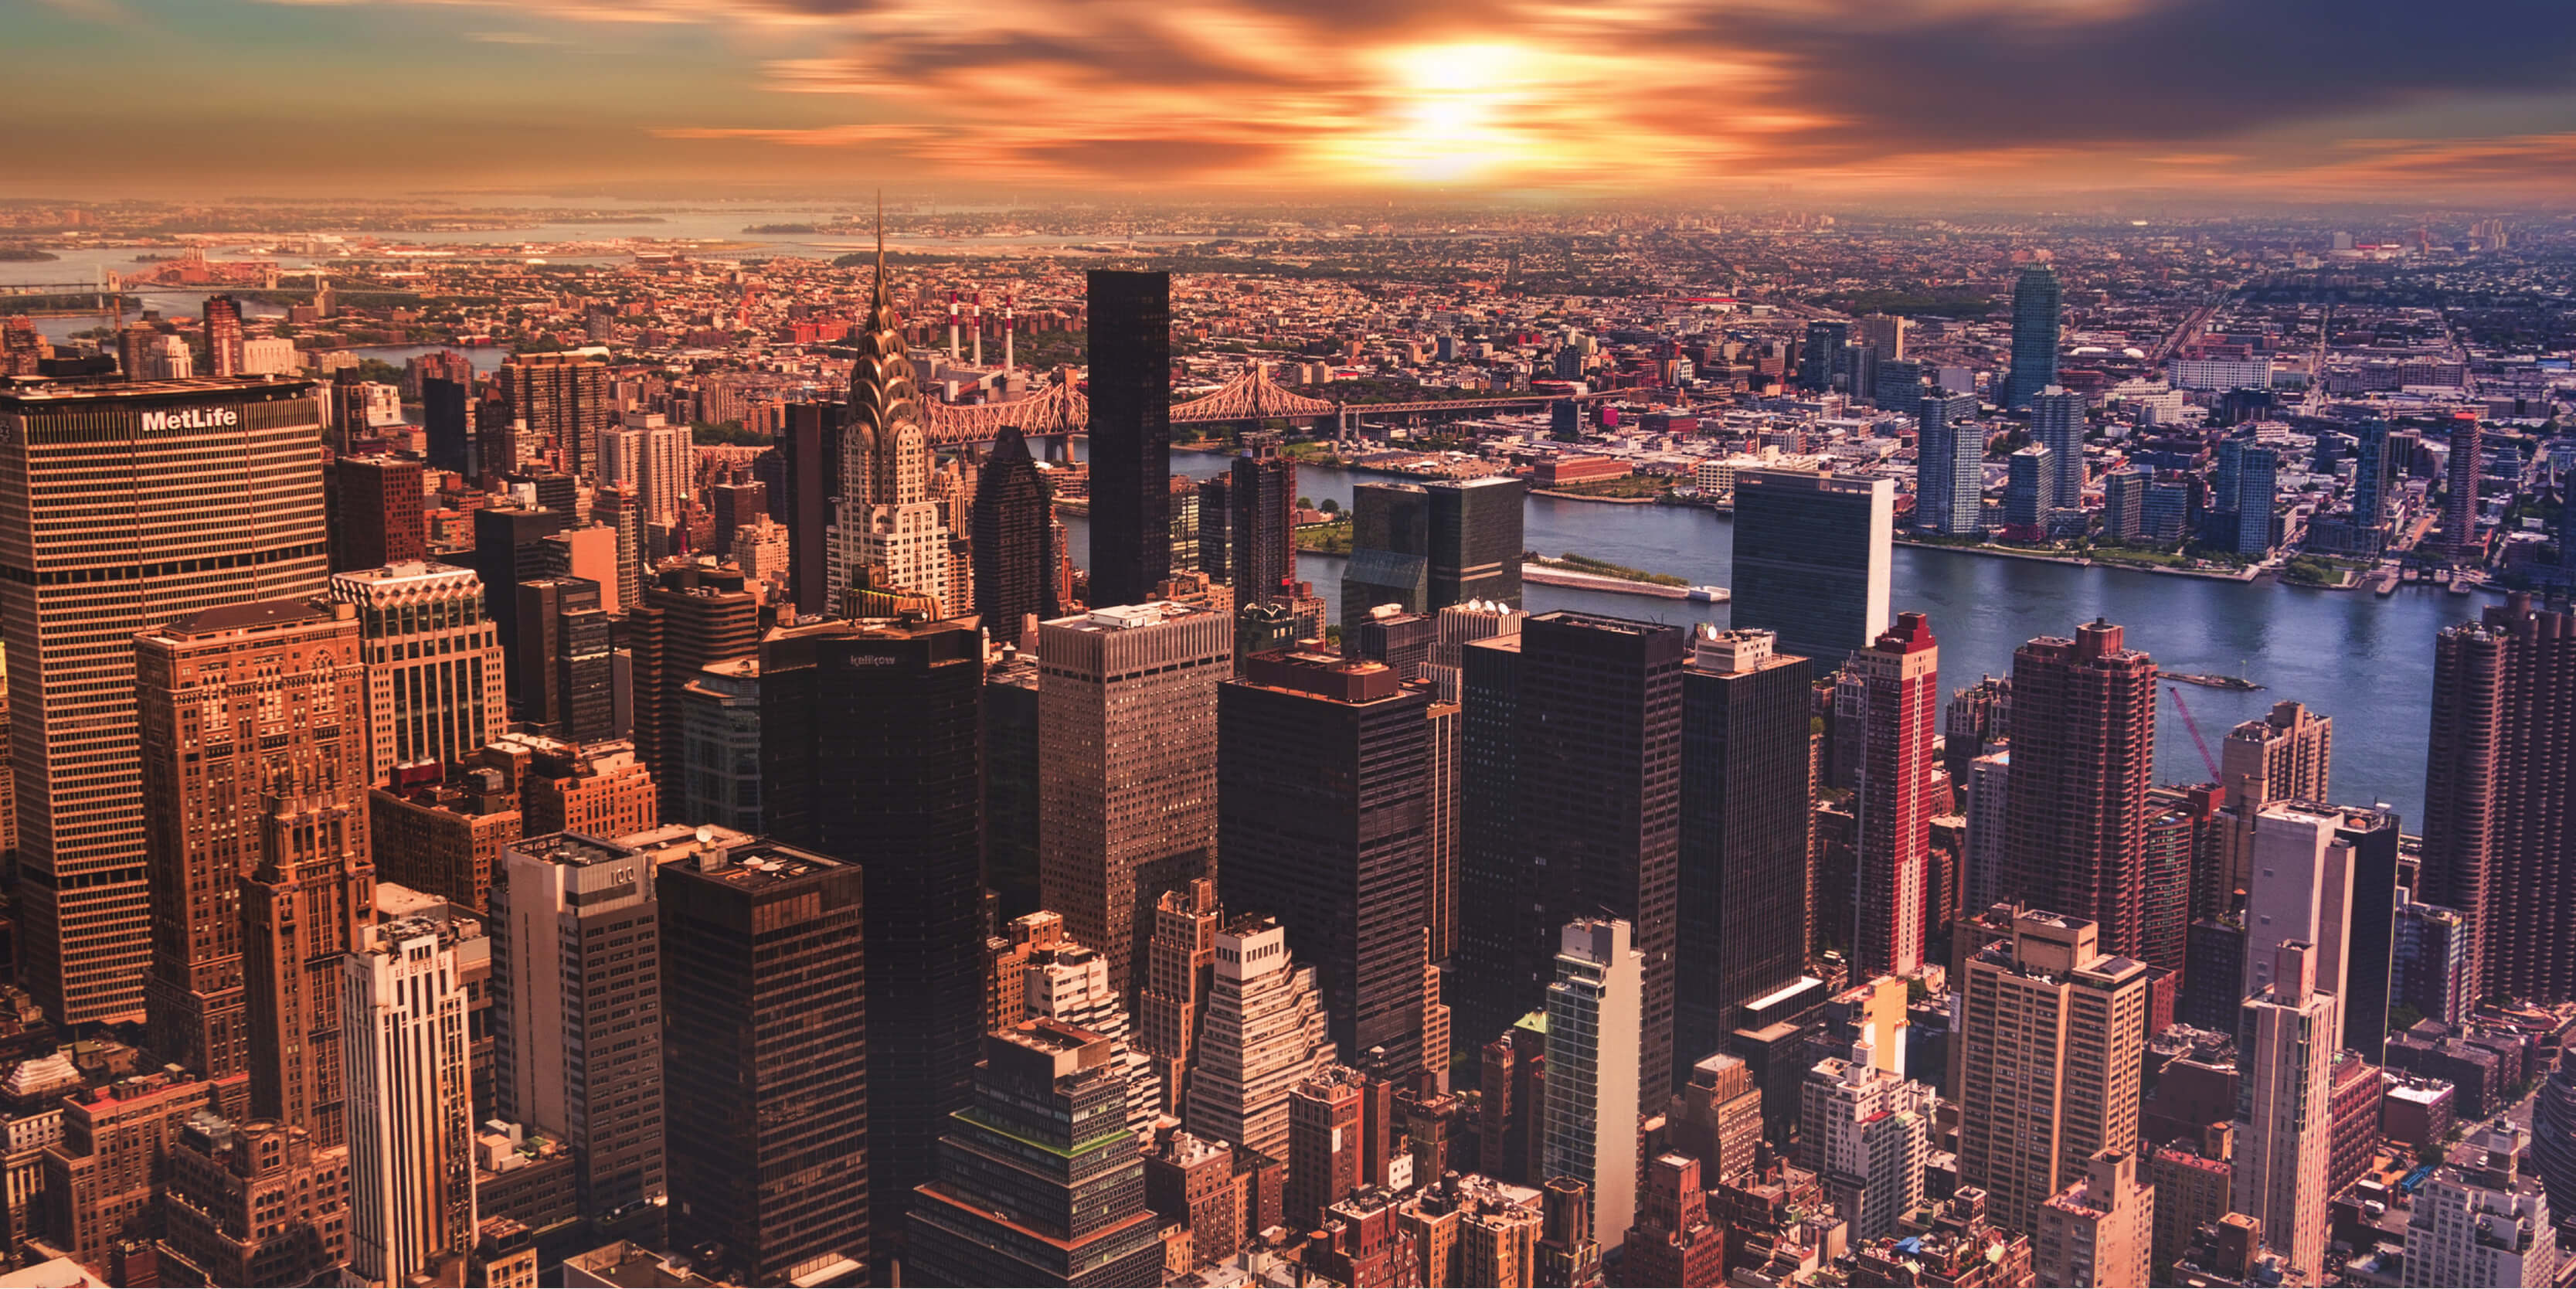 A photo of New York City skylines at sunset